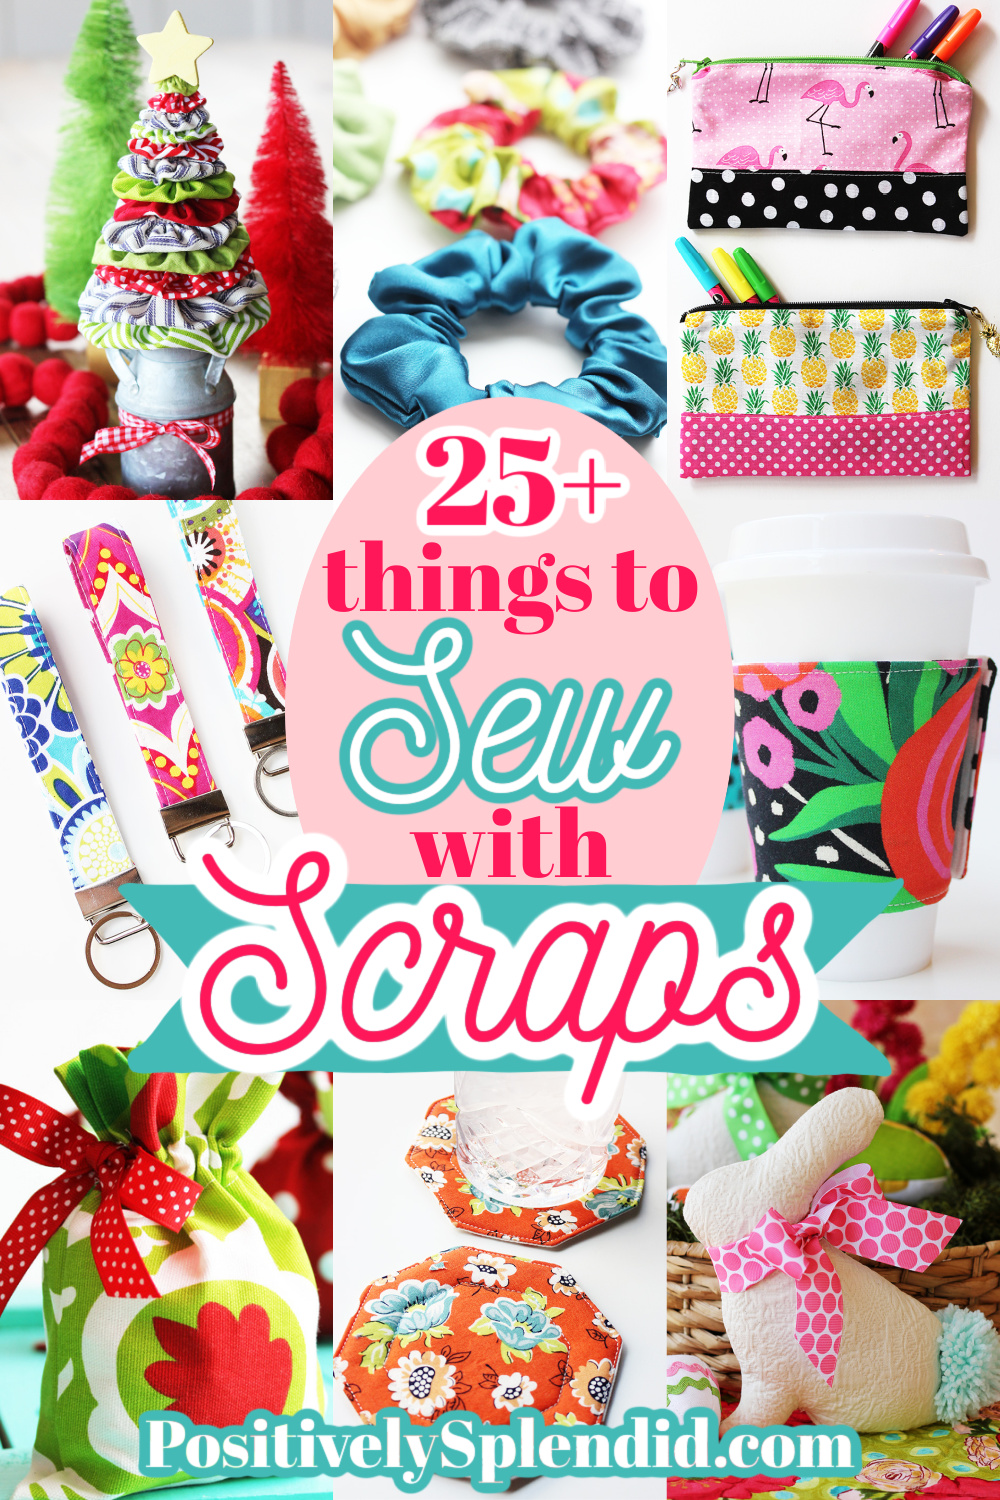 25+ Scrap Fabric Projects to Use Up Your Stash! - Positively Splendid  {Crafts, Sewing, Recipes and Home Decor}